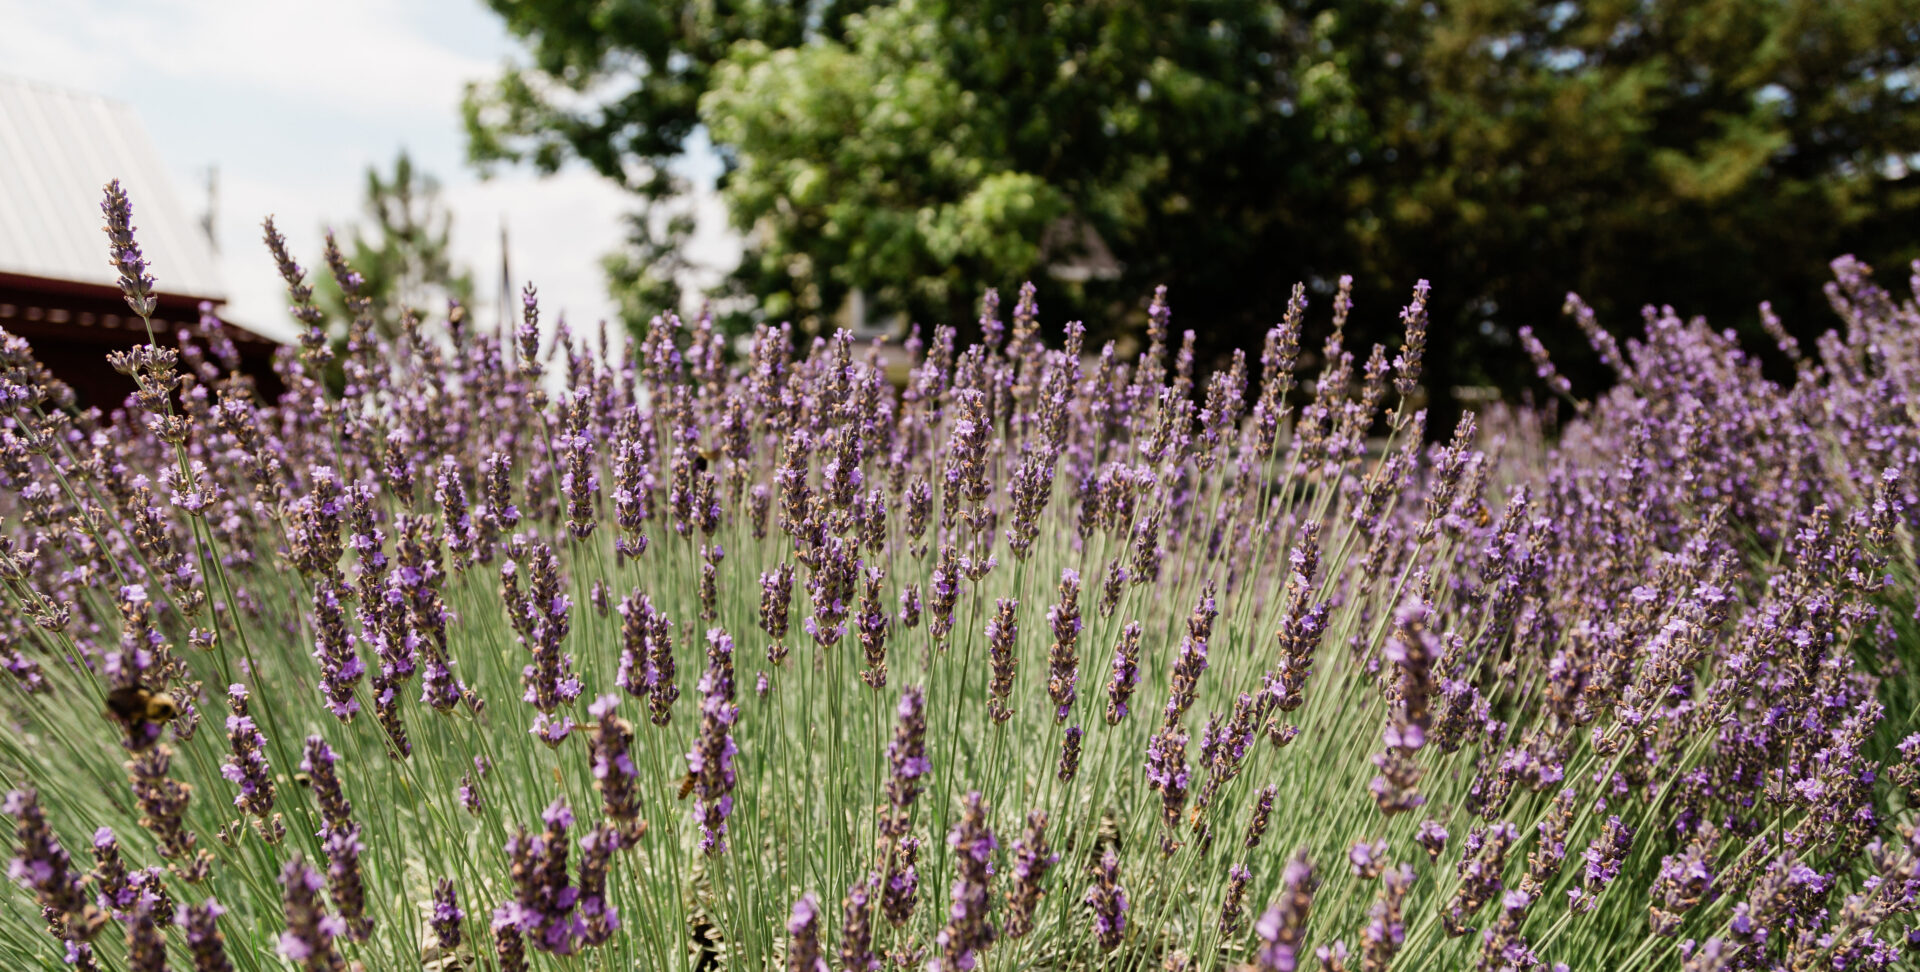 Field of lavender at White Hills Farm for the Salt Fire Smoke Food Festival